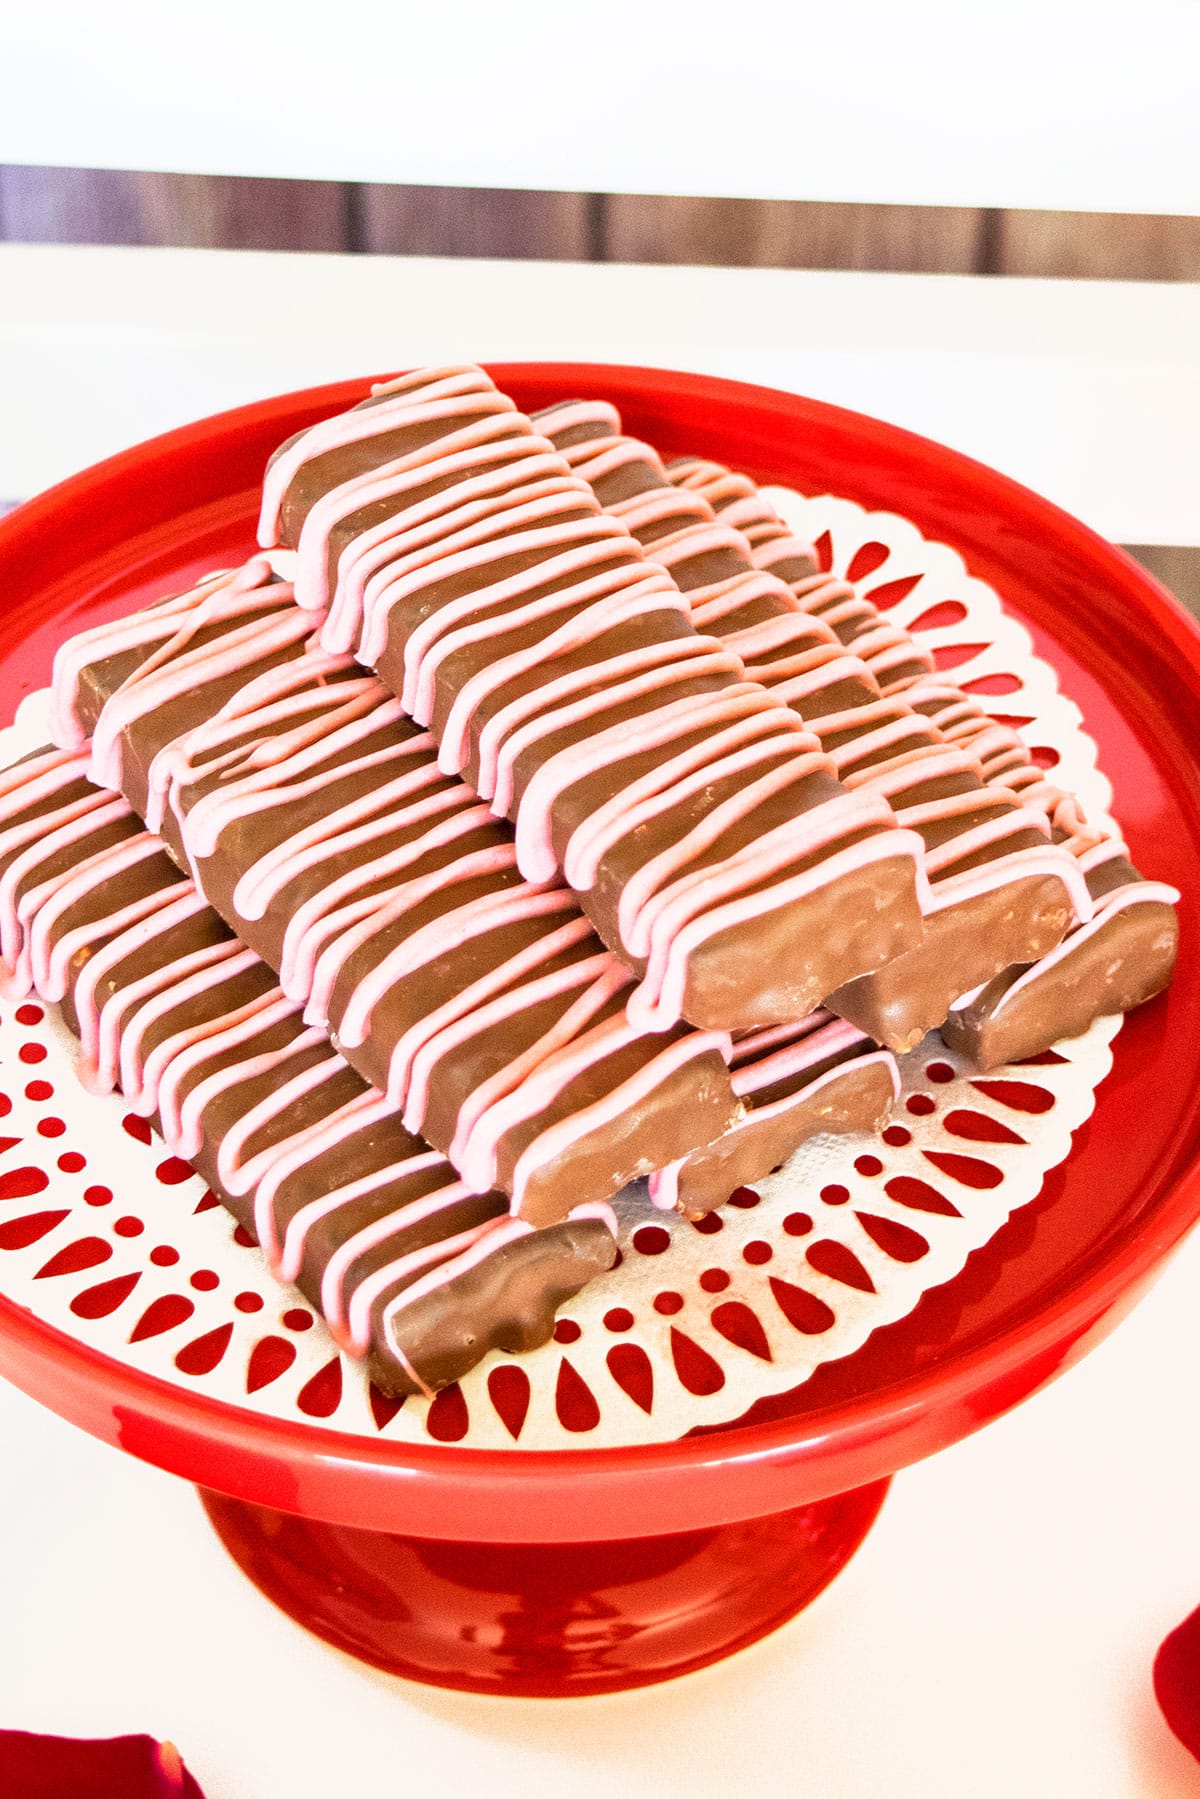 Chocolate Covered Granola Bars on Red Cake Stand.